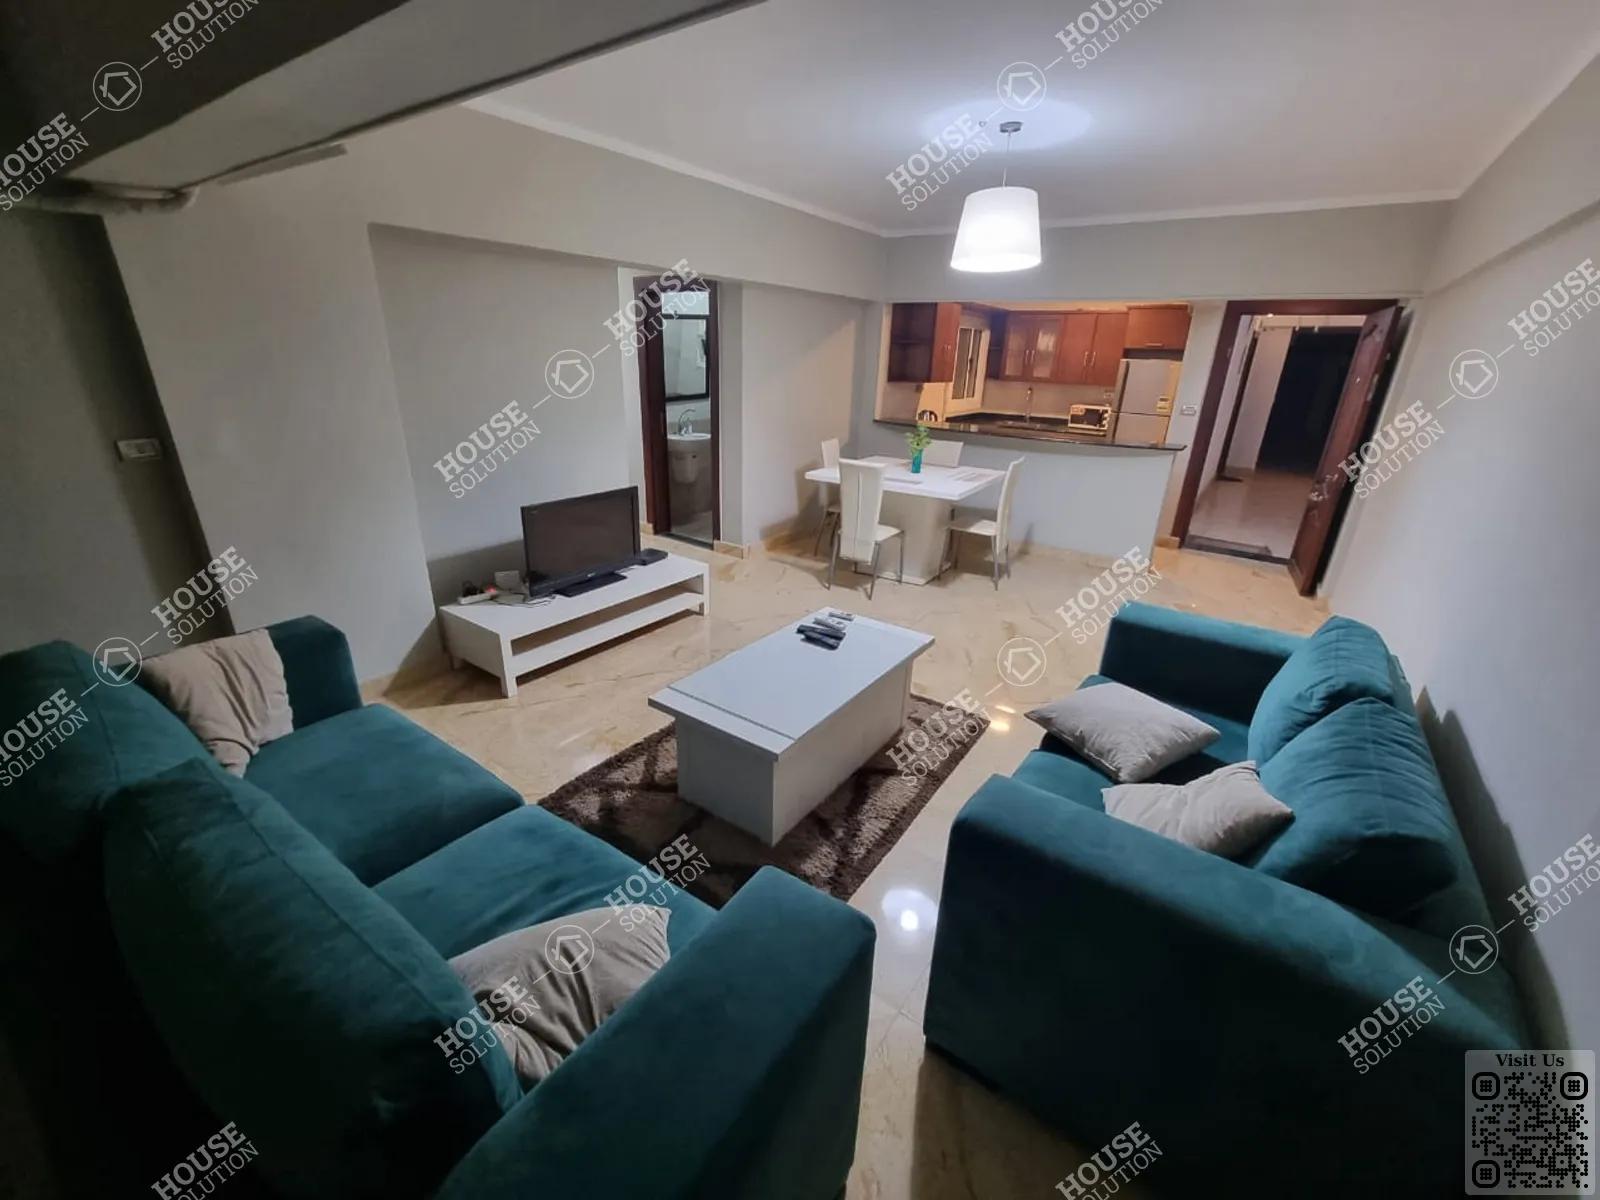 RECEPTION  @ Apartments For Rent In Maadi Maadi Degla Area: 110 m² consists of 2 Bedrooms 2 Bathrooms Modern furnished 5 stars #4346-0